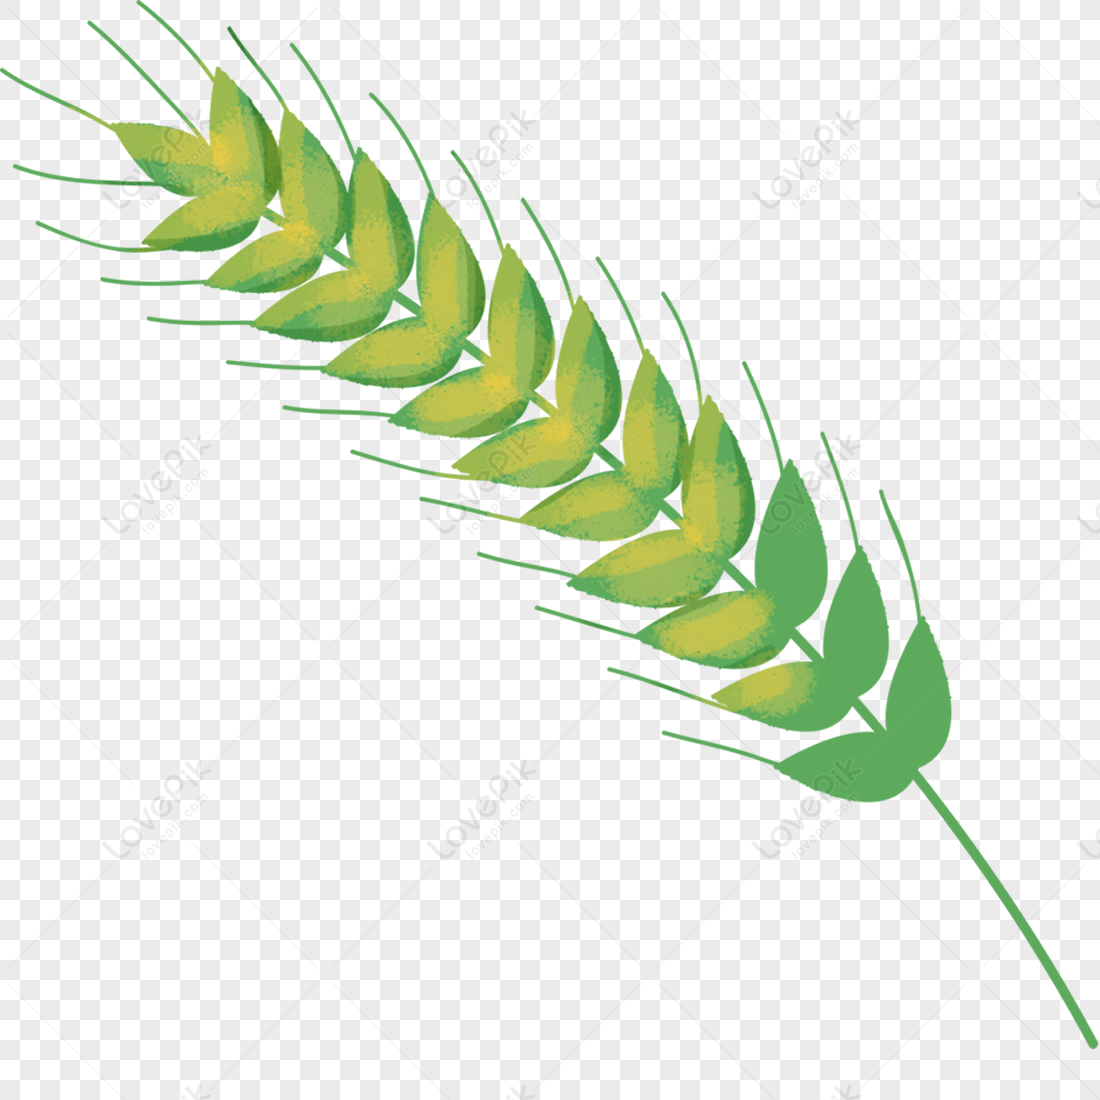 Cartoon Wheat PNG Picture And Clipart Image For Free Download - Lovepik |  400201605